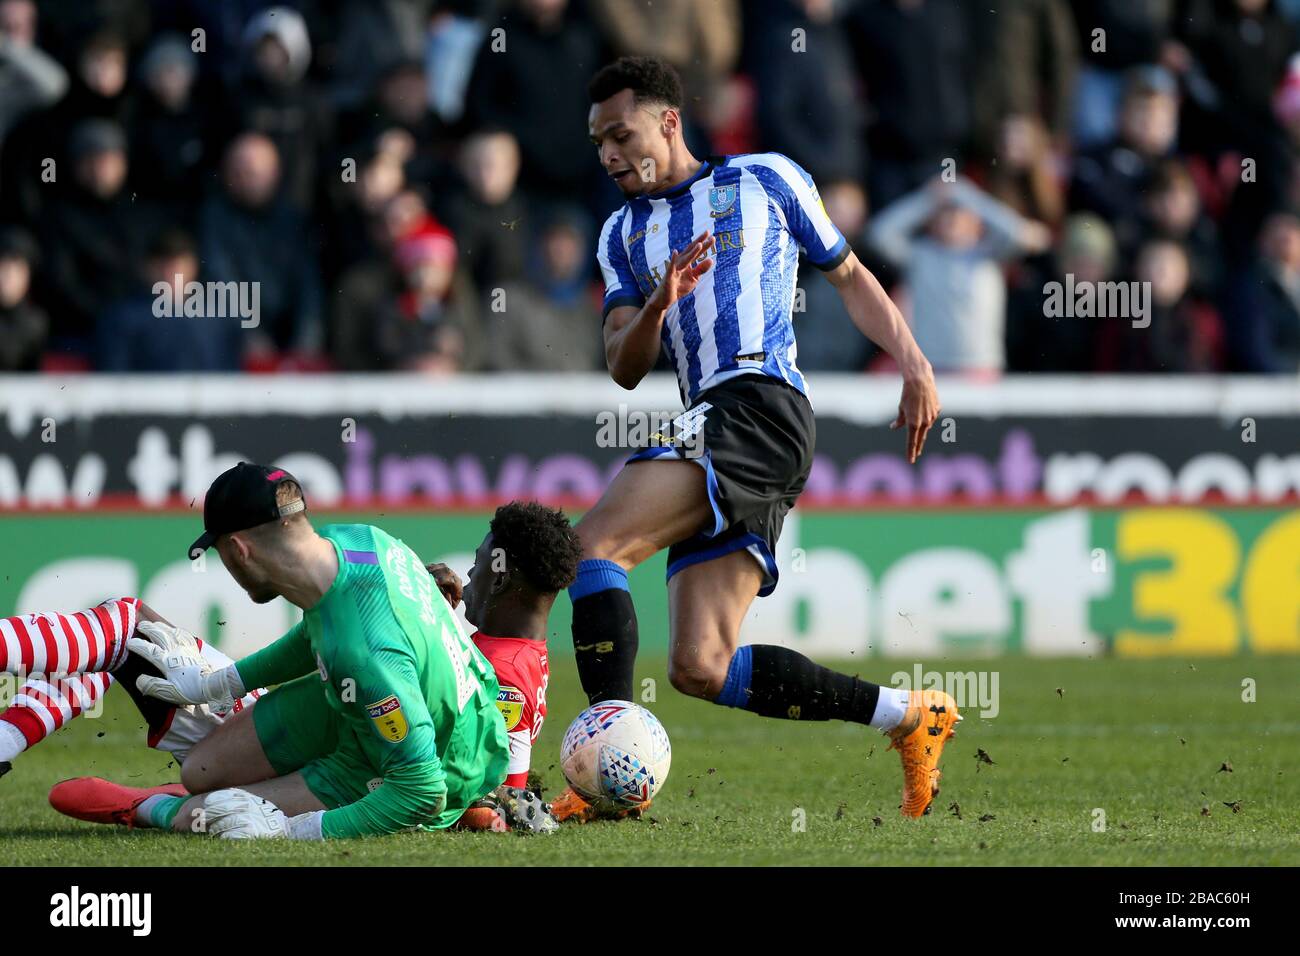 Sheffield Wednesday's Jacob Murphy See's His shot blocked by Barnsley Goalkeeper Brad Collins Foto Stock